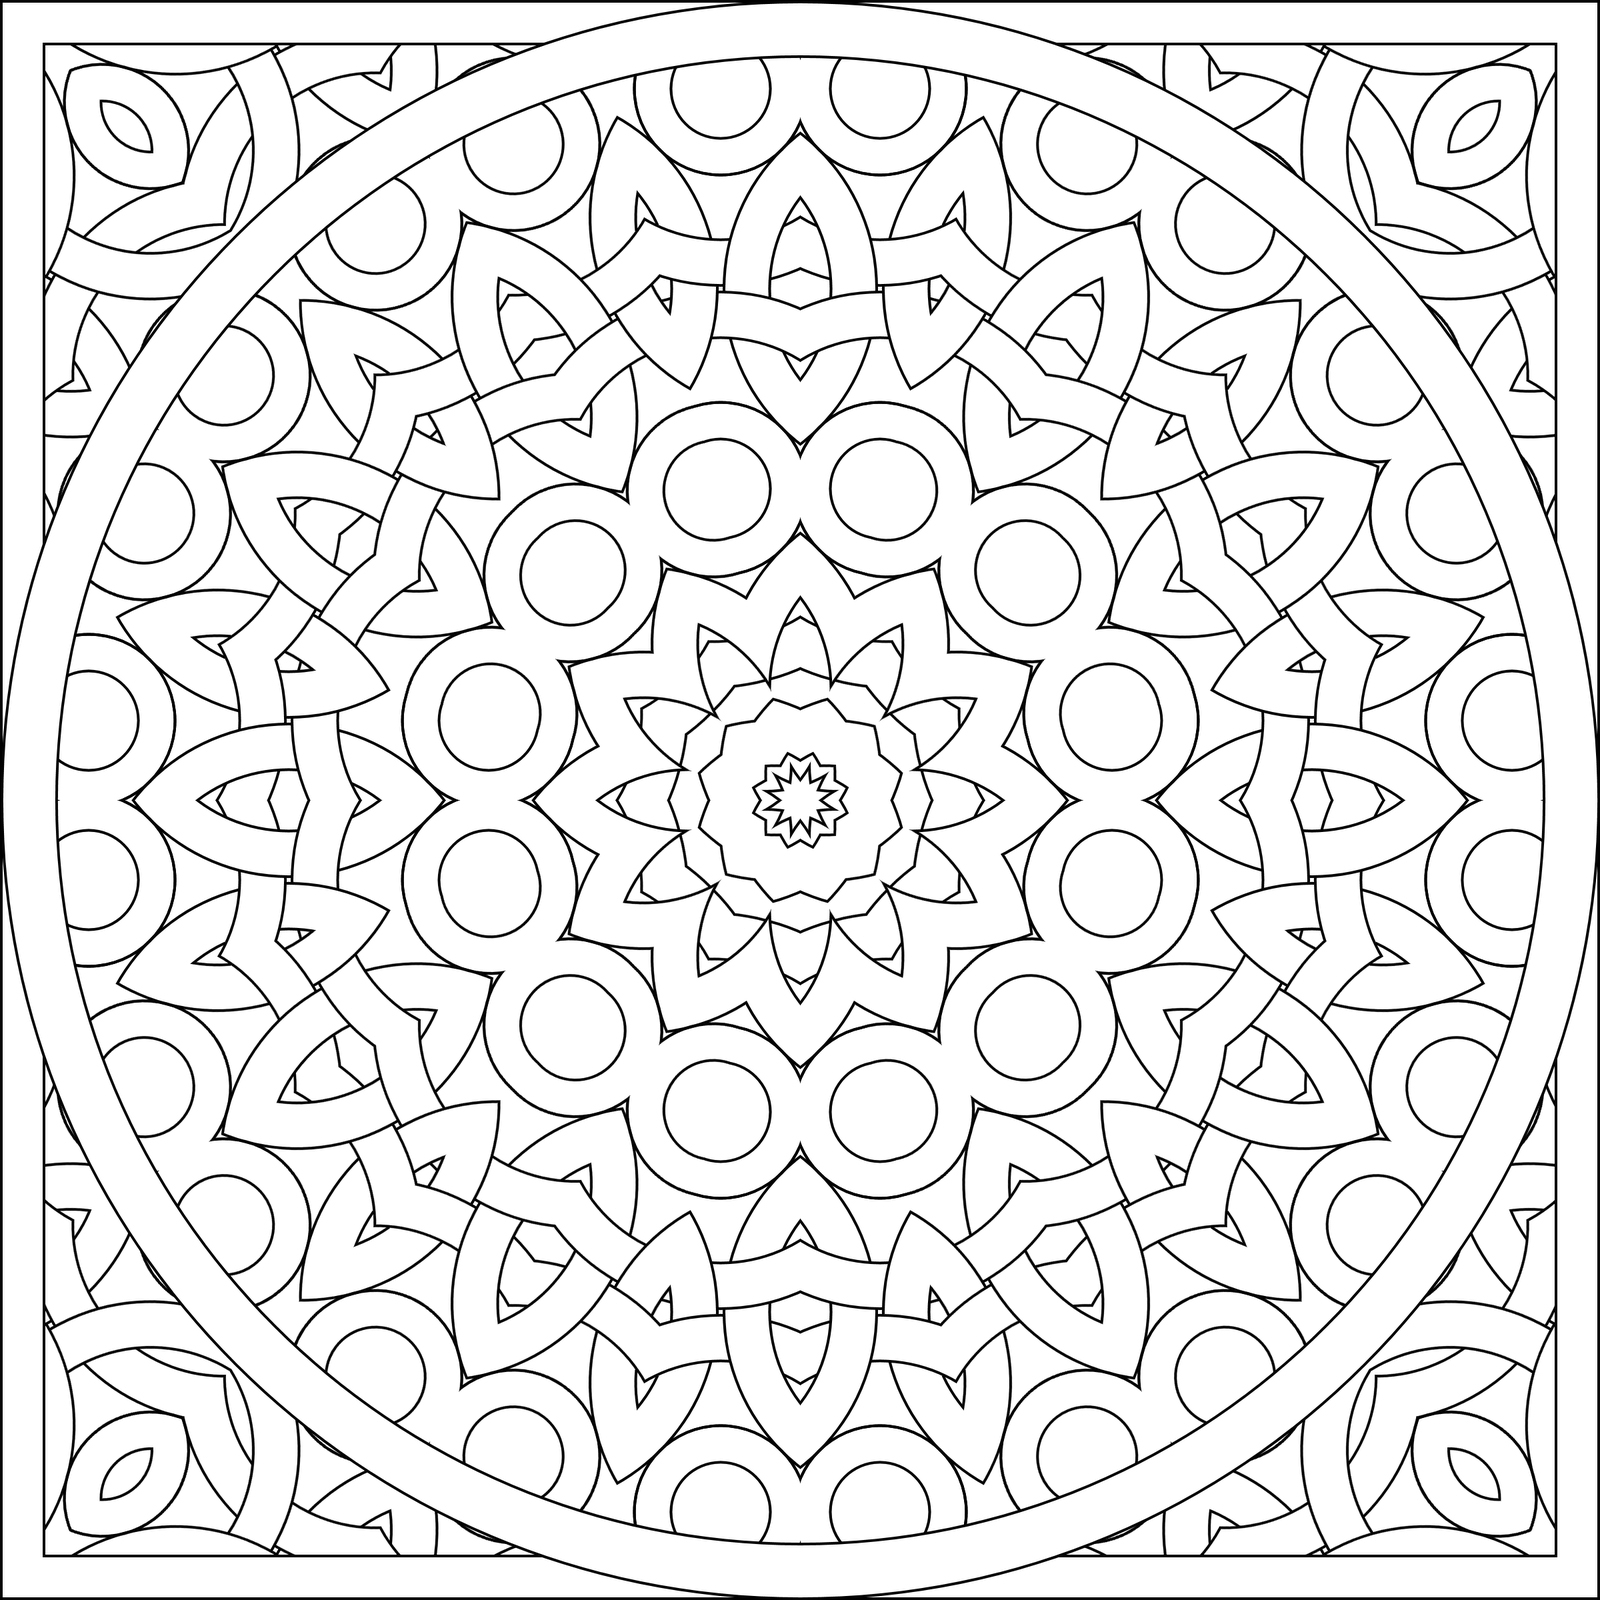 Printable Coloring Pages Patterns